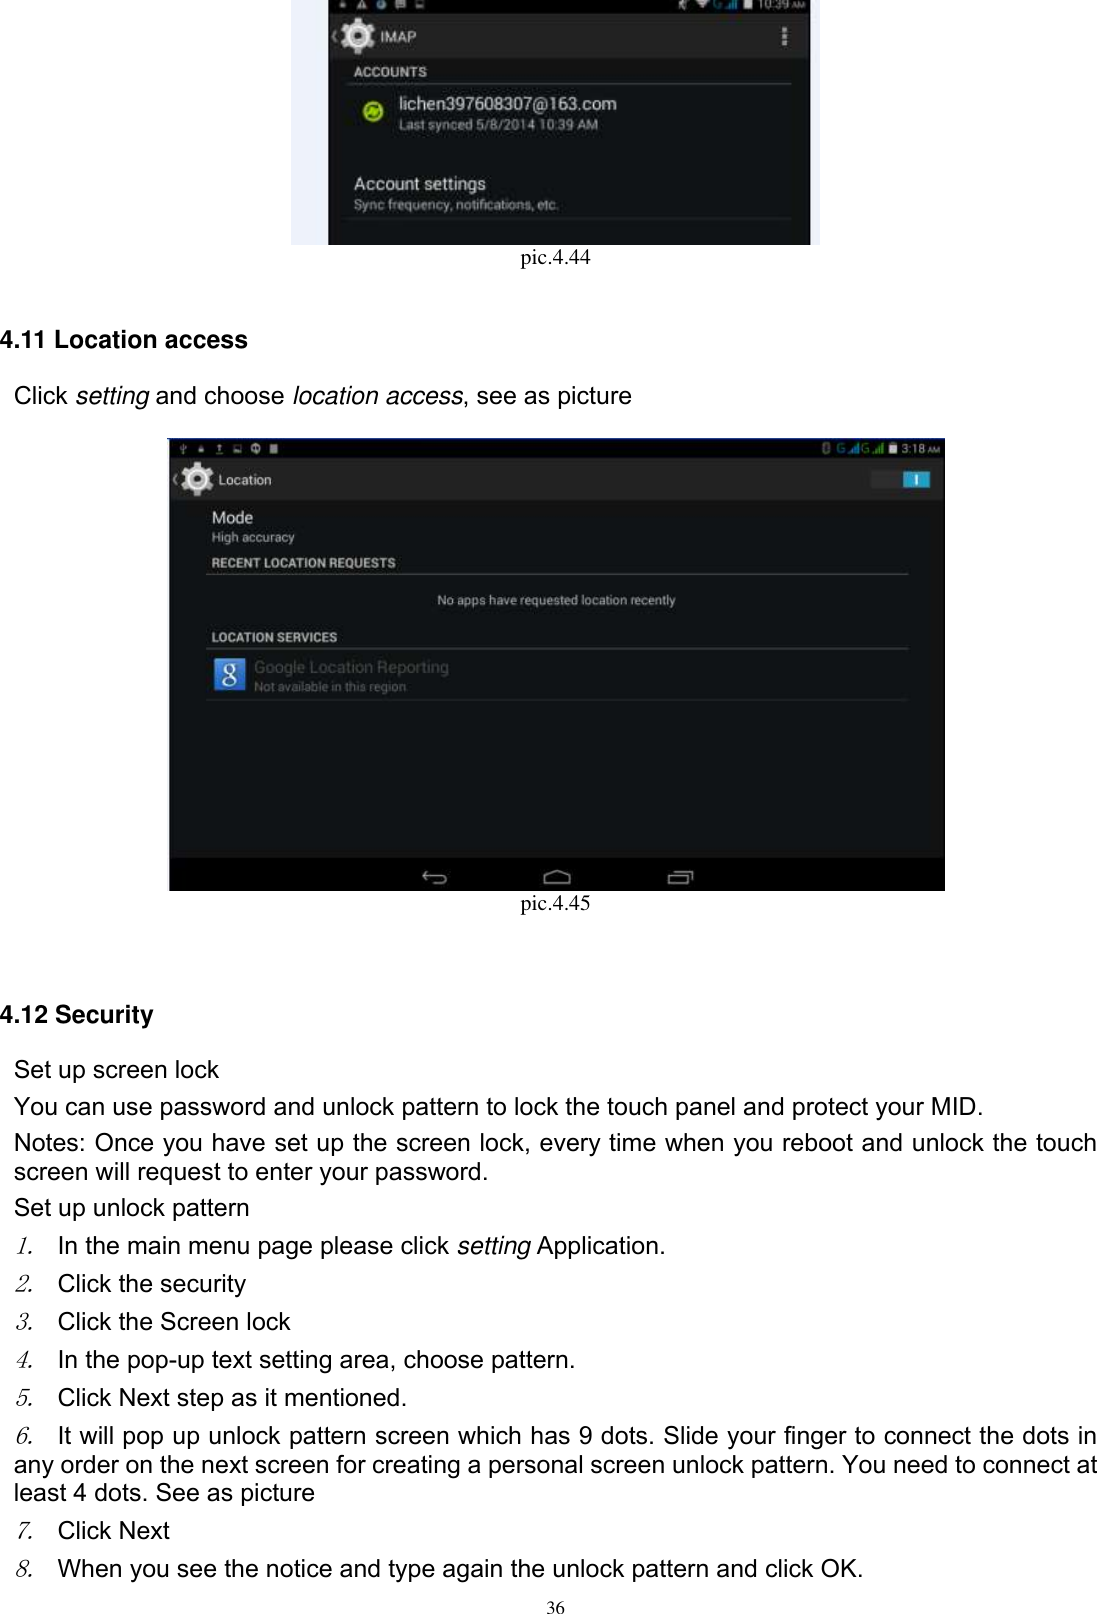      36  pic.4.44  4.11 Location access Click setting and choose location access, see as picture       pic.4.45   4.12 Security Set up screen lock You can use password and unlock pattern to lock the touch panel and protect your MID. Notes: Once you have set up the screen lock, every time when you reboot and unlock the touch screen will request to enter your password. Set up unlock pattern 1. In the main menu page please click setting Application. 2. Click the security   3. Click the Screen lock 4. In the pop-up text setting area, choose pattern. 5. Click Next step as it mentioned.   6. It will pop up unlock pattern screen which has 9 dots. Slide your finger to connect the dots in any order on the next screen for creating a personal screen unlock pattern. You need to connect at least 4 dots. See as picture   7. Click Next 8. When you see the notice and type again the unlock pattern and click OK. 